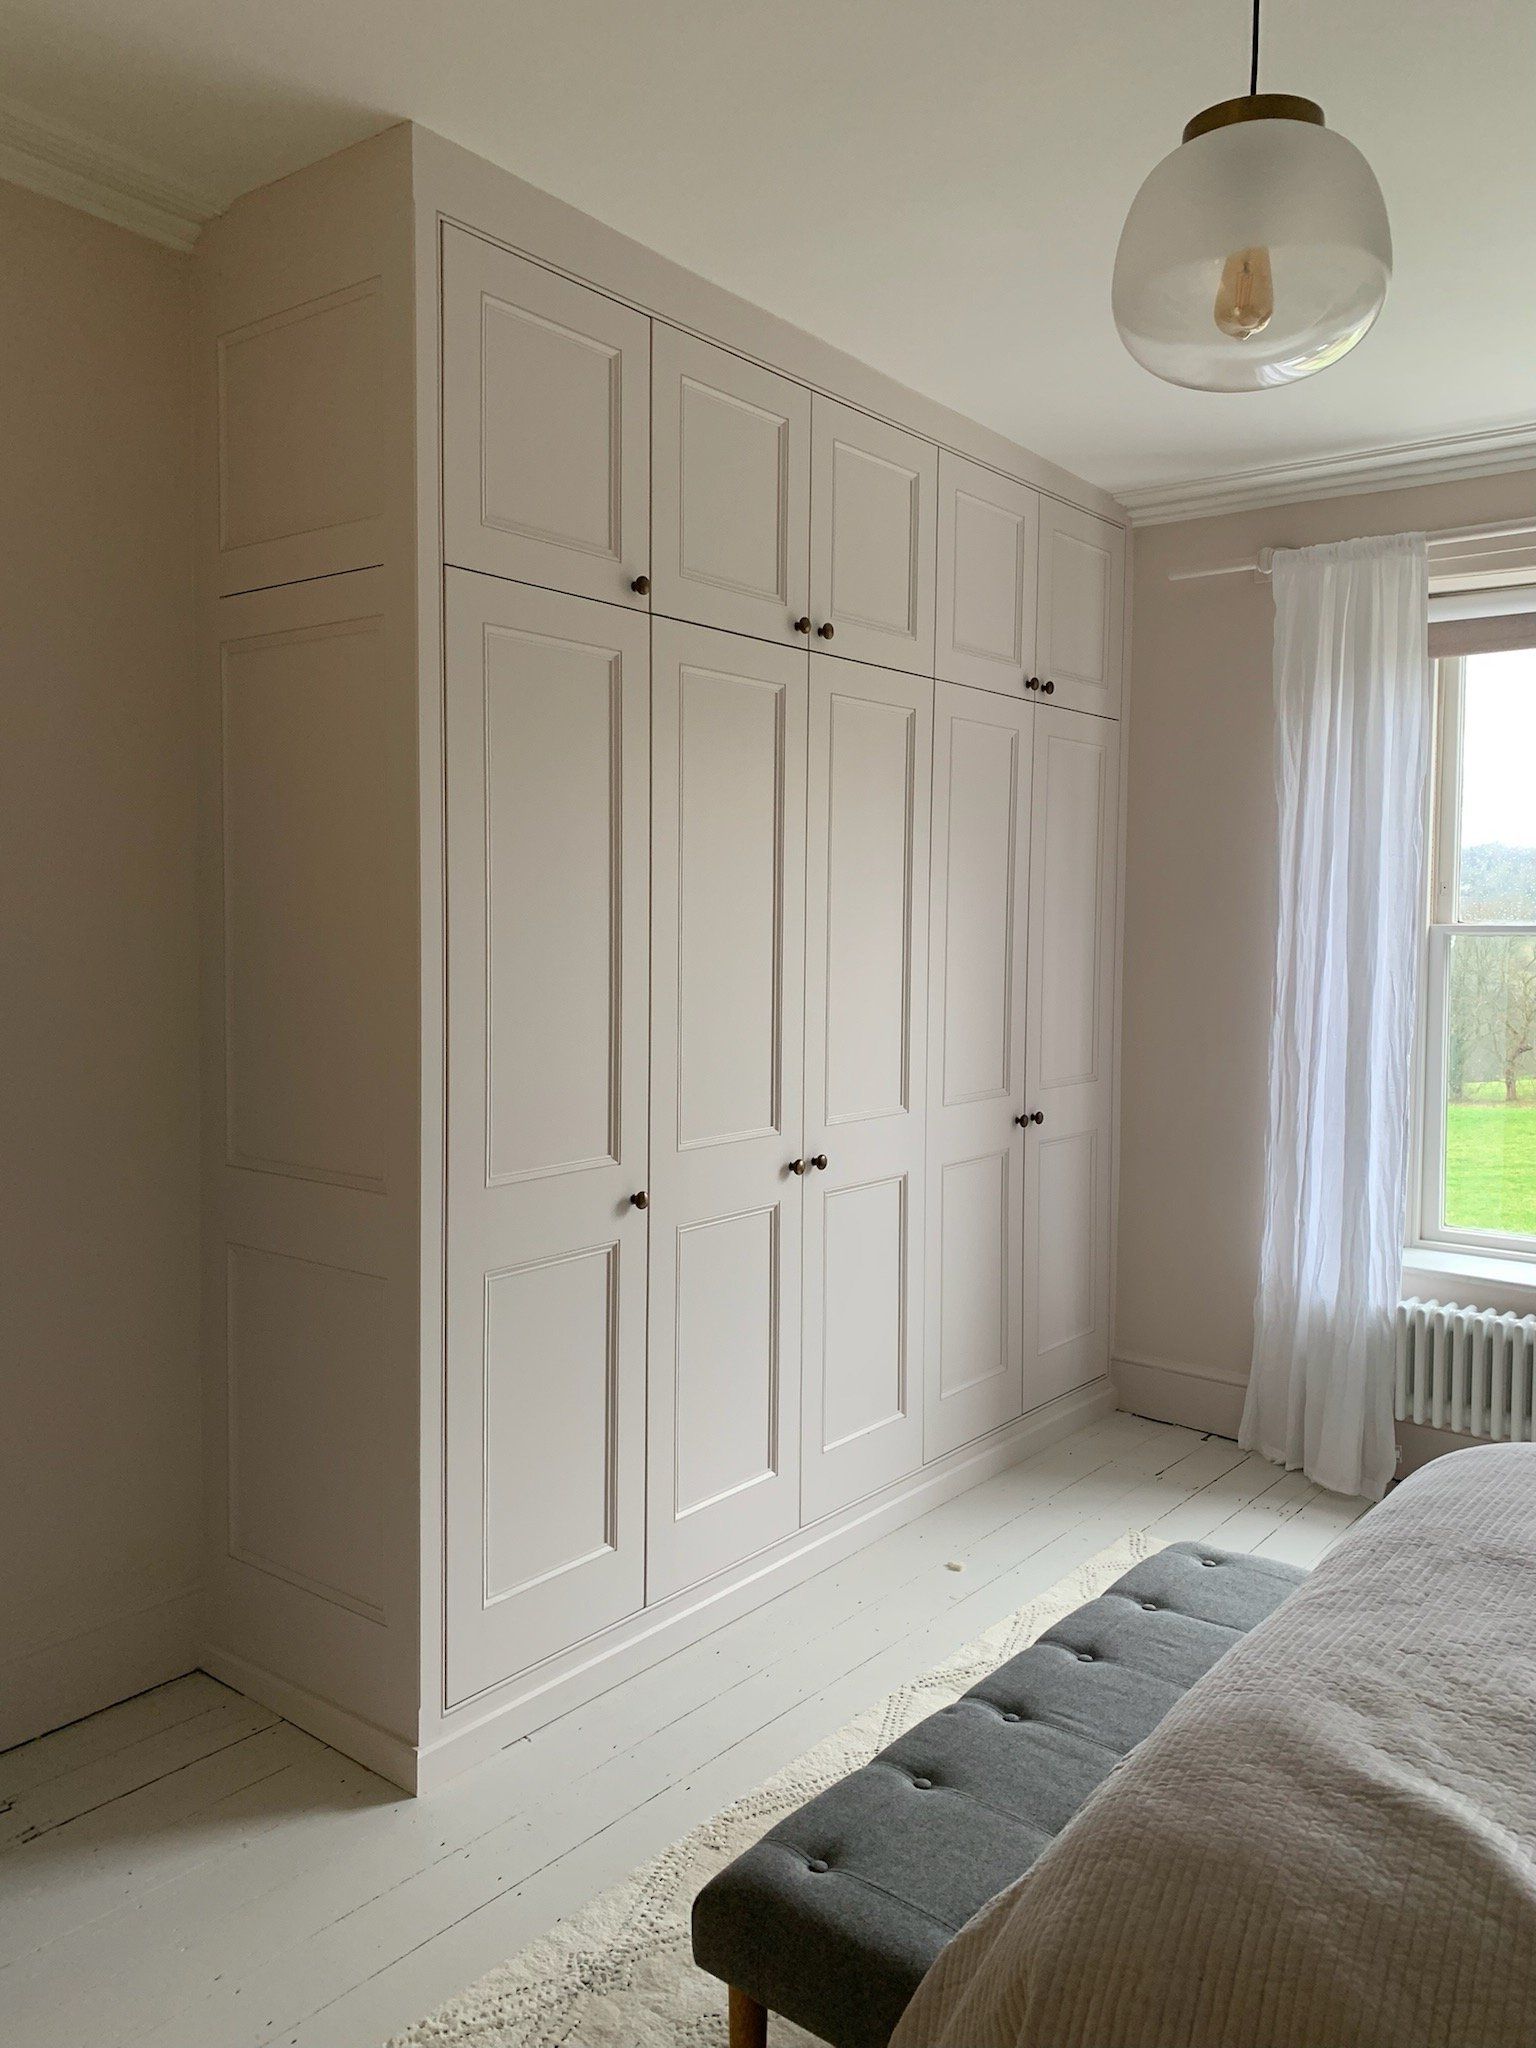 Wardrobes — Oliver Hazael Bespoke Carpentry Within Victorian Style Wardrobes (View 14 of 20)